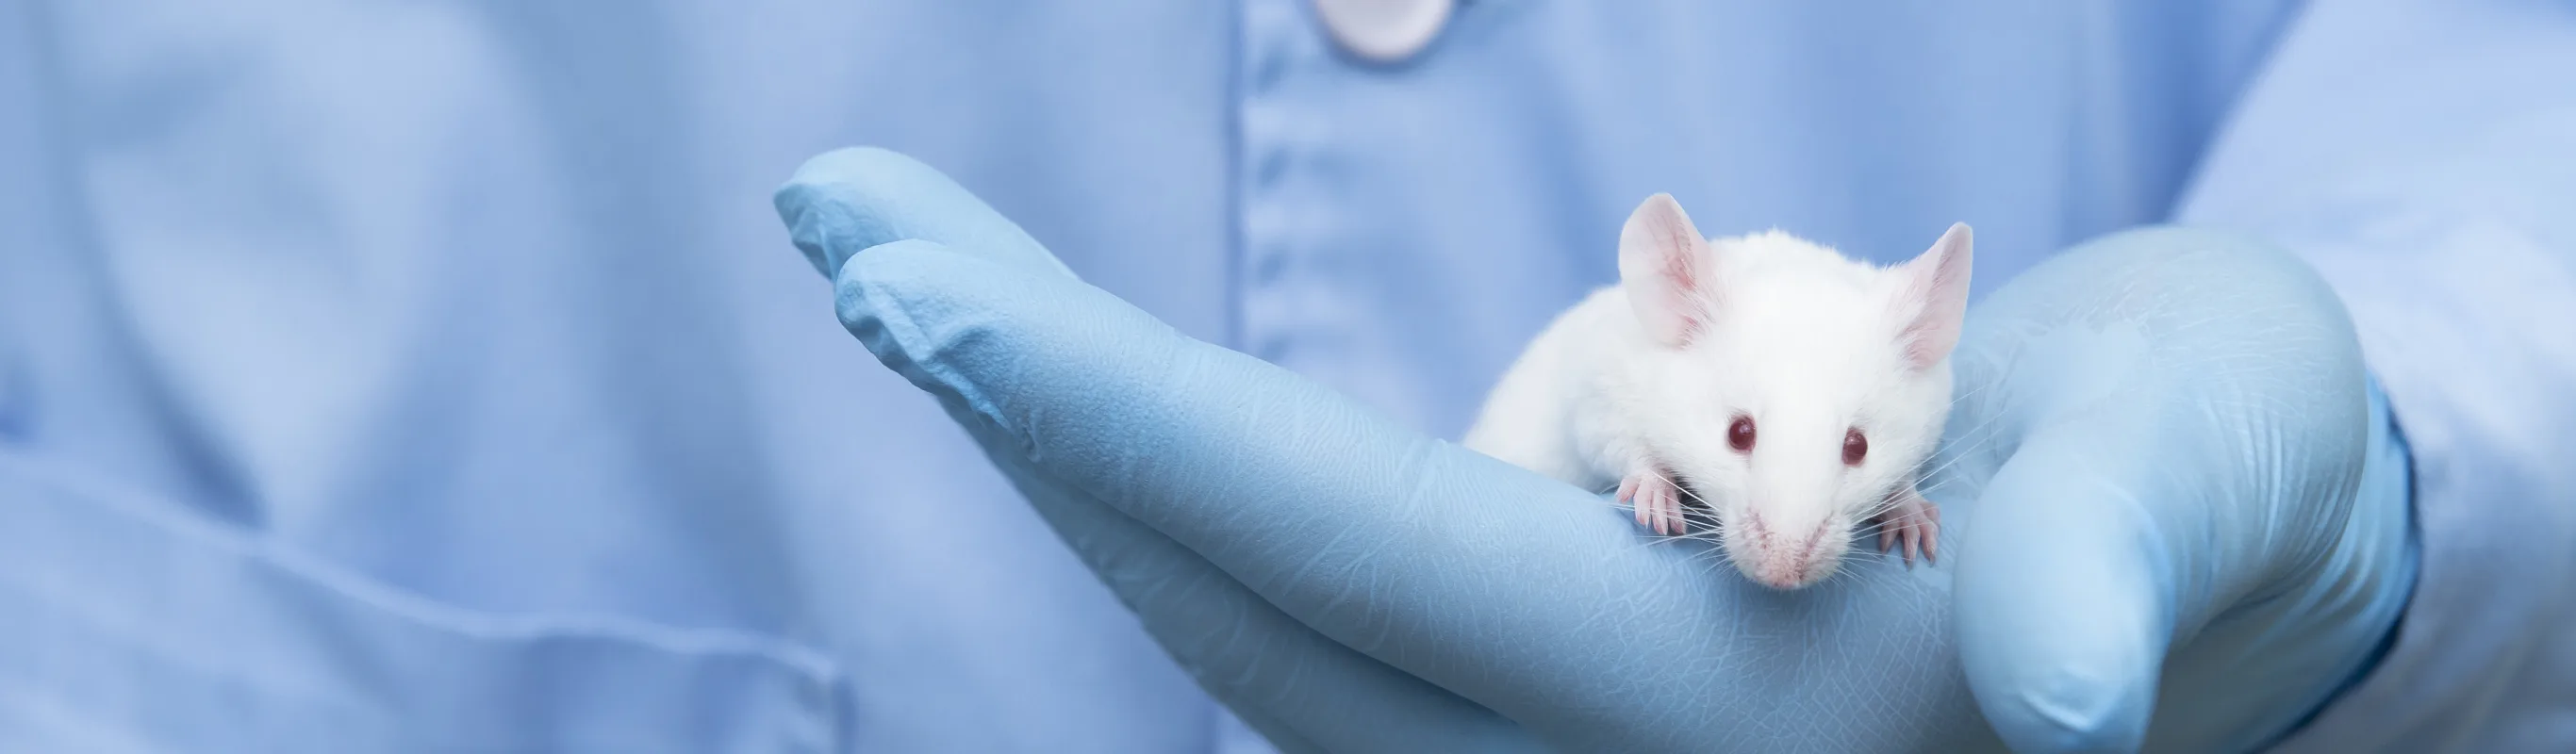 Mouse being held in hands